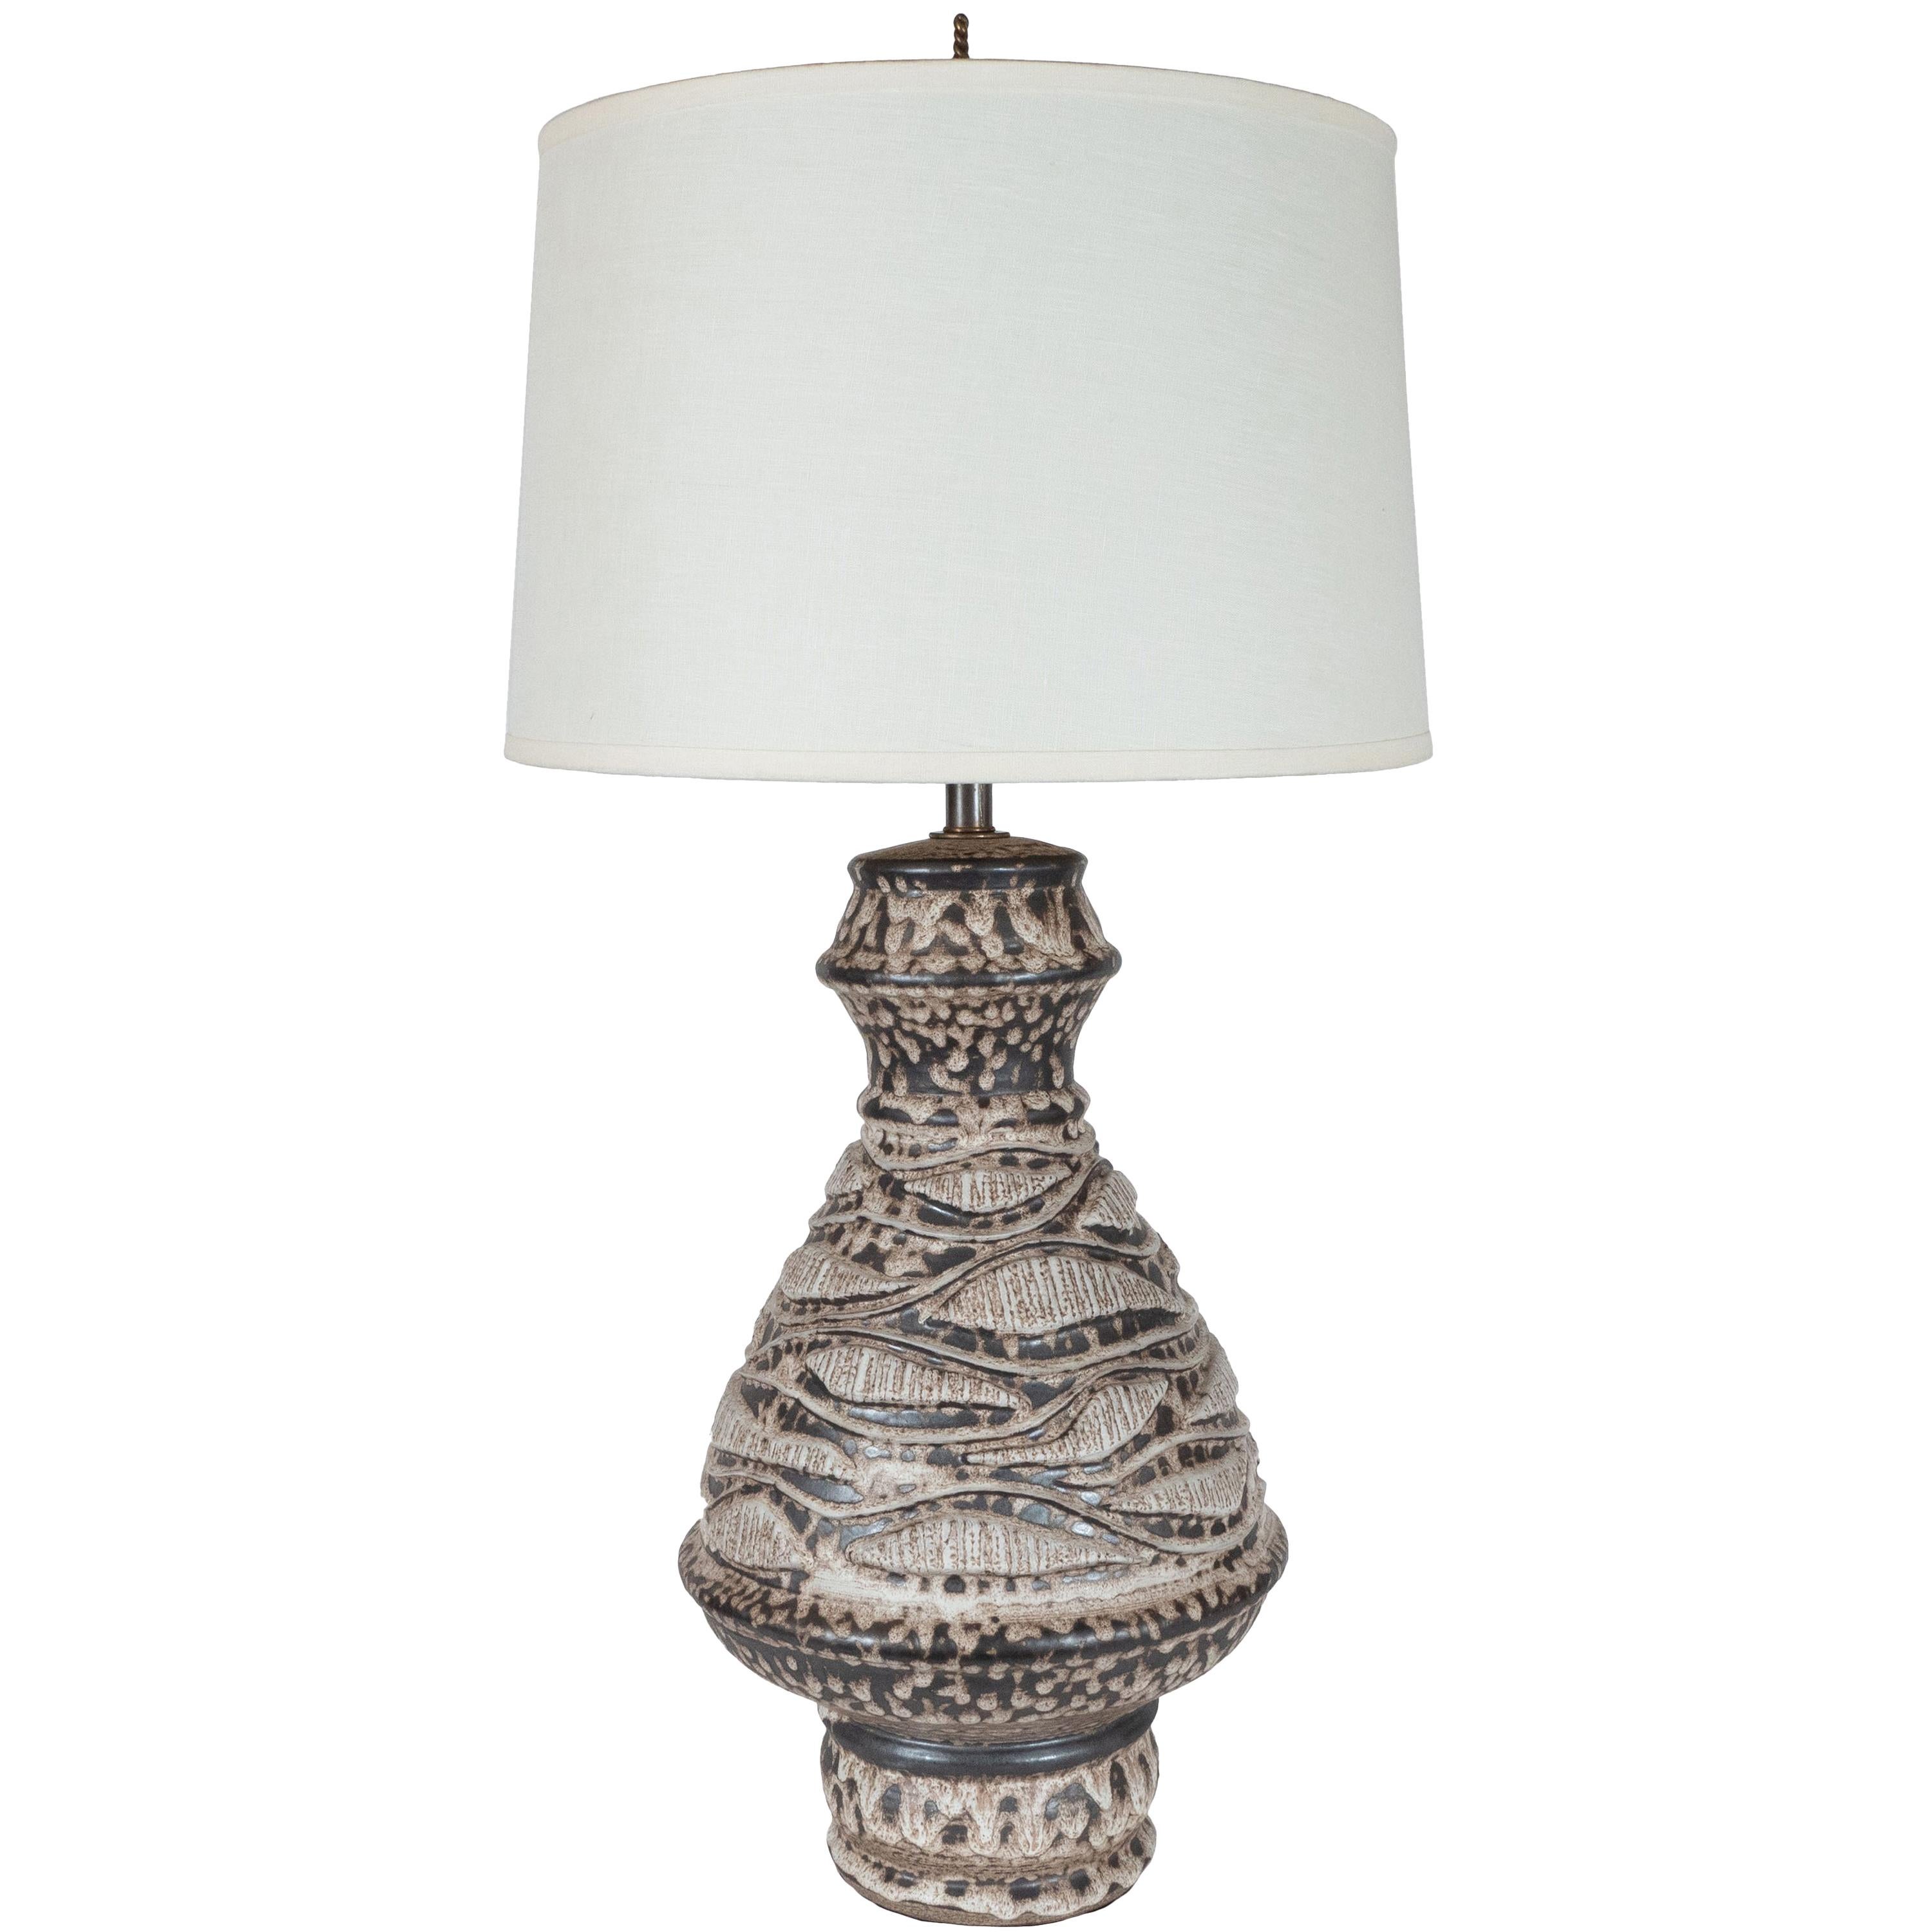 Organic Mid-Century Modern Handcrafted and Carved Ceramic Table Lamp